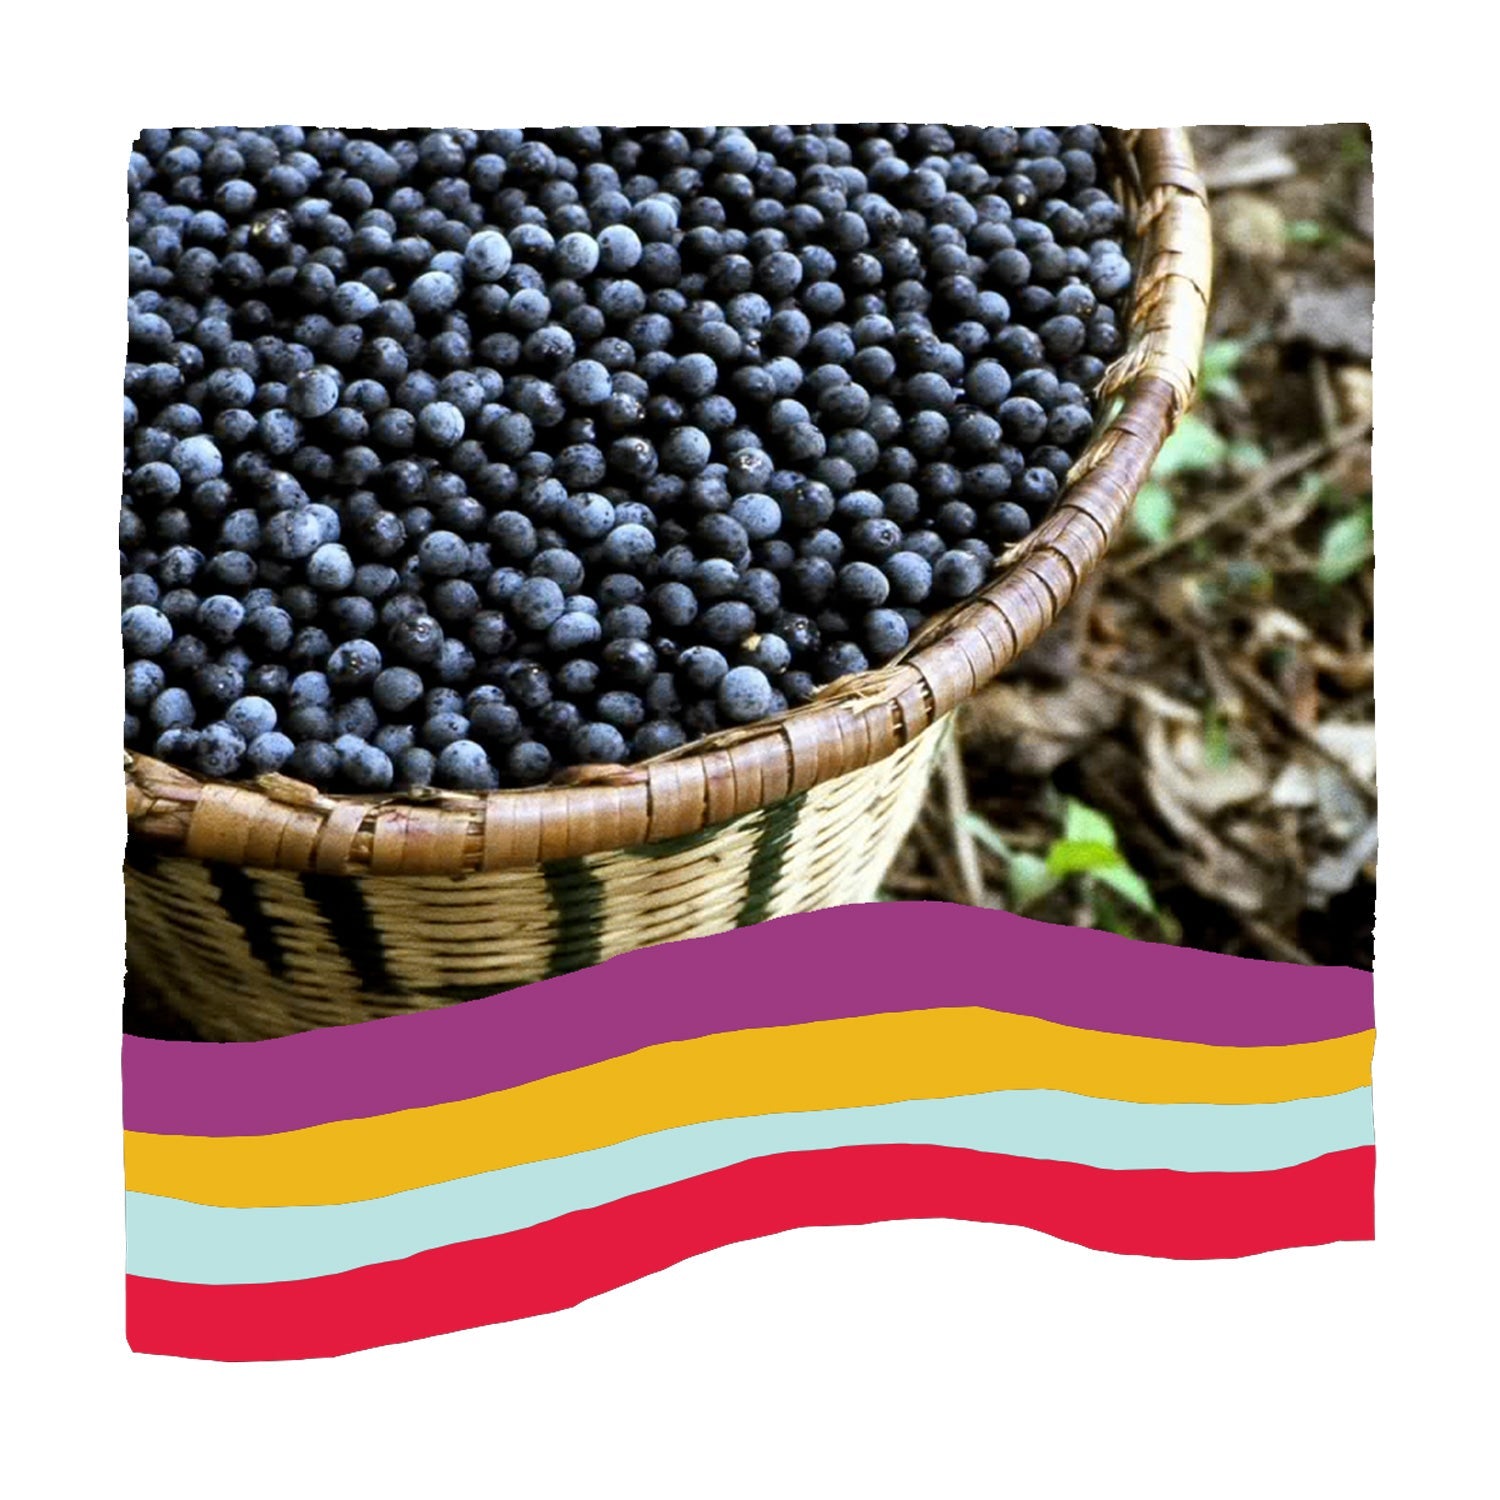 Learn more about Superfood Qualities of Açaí 